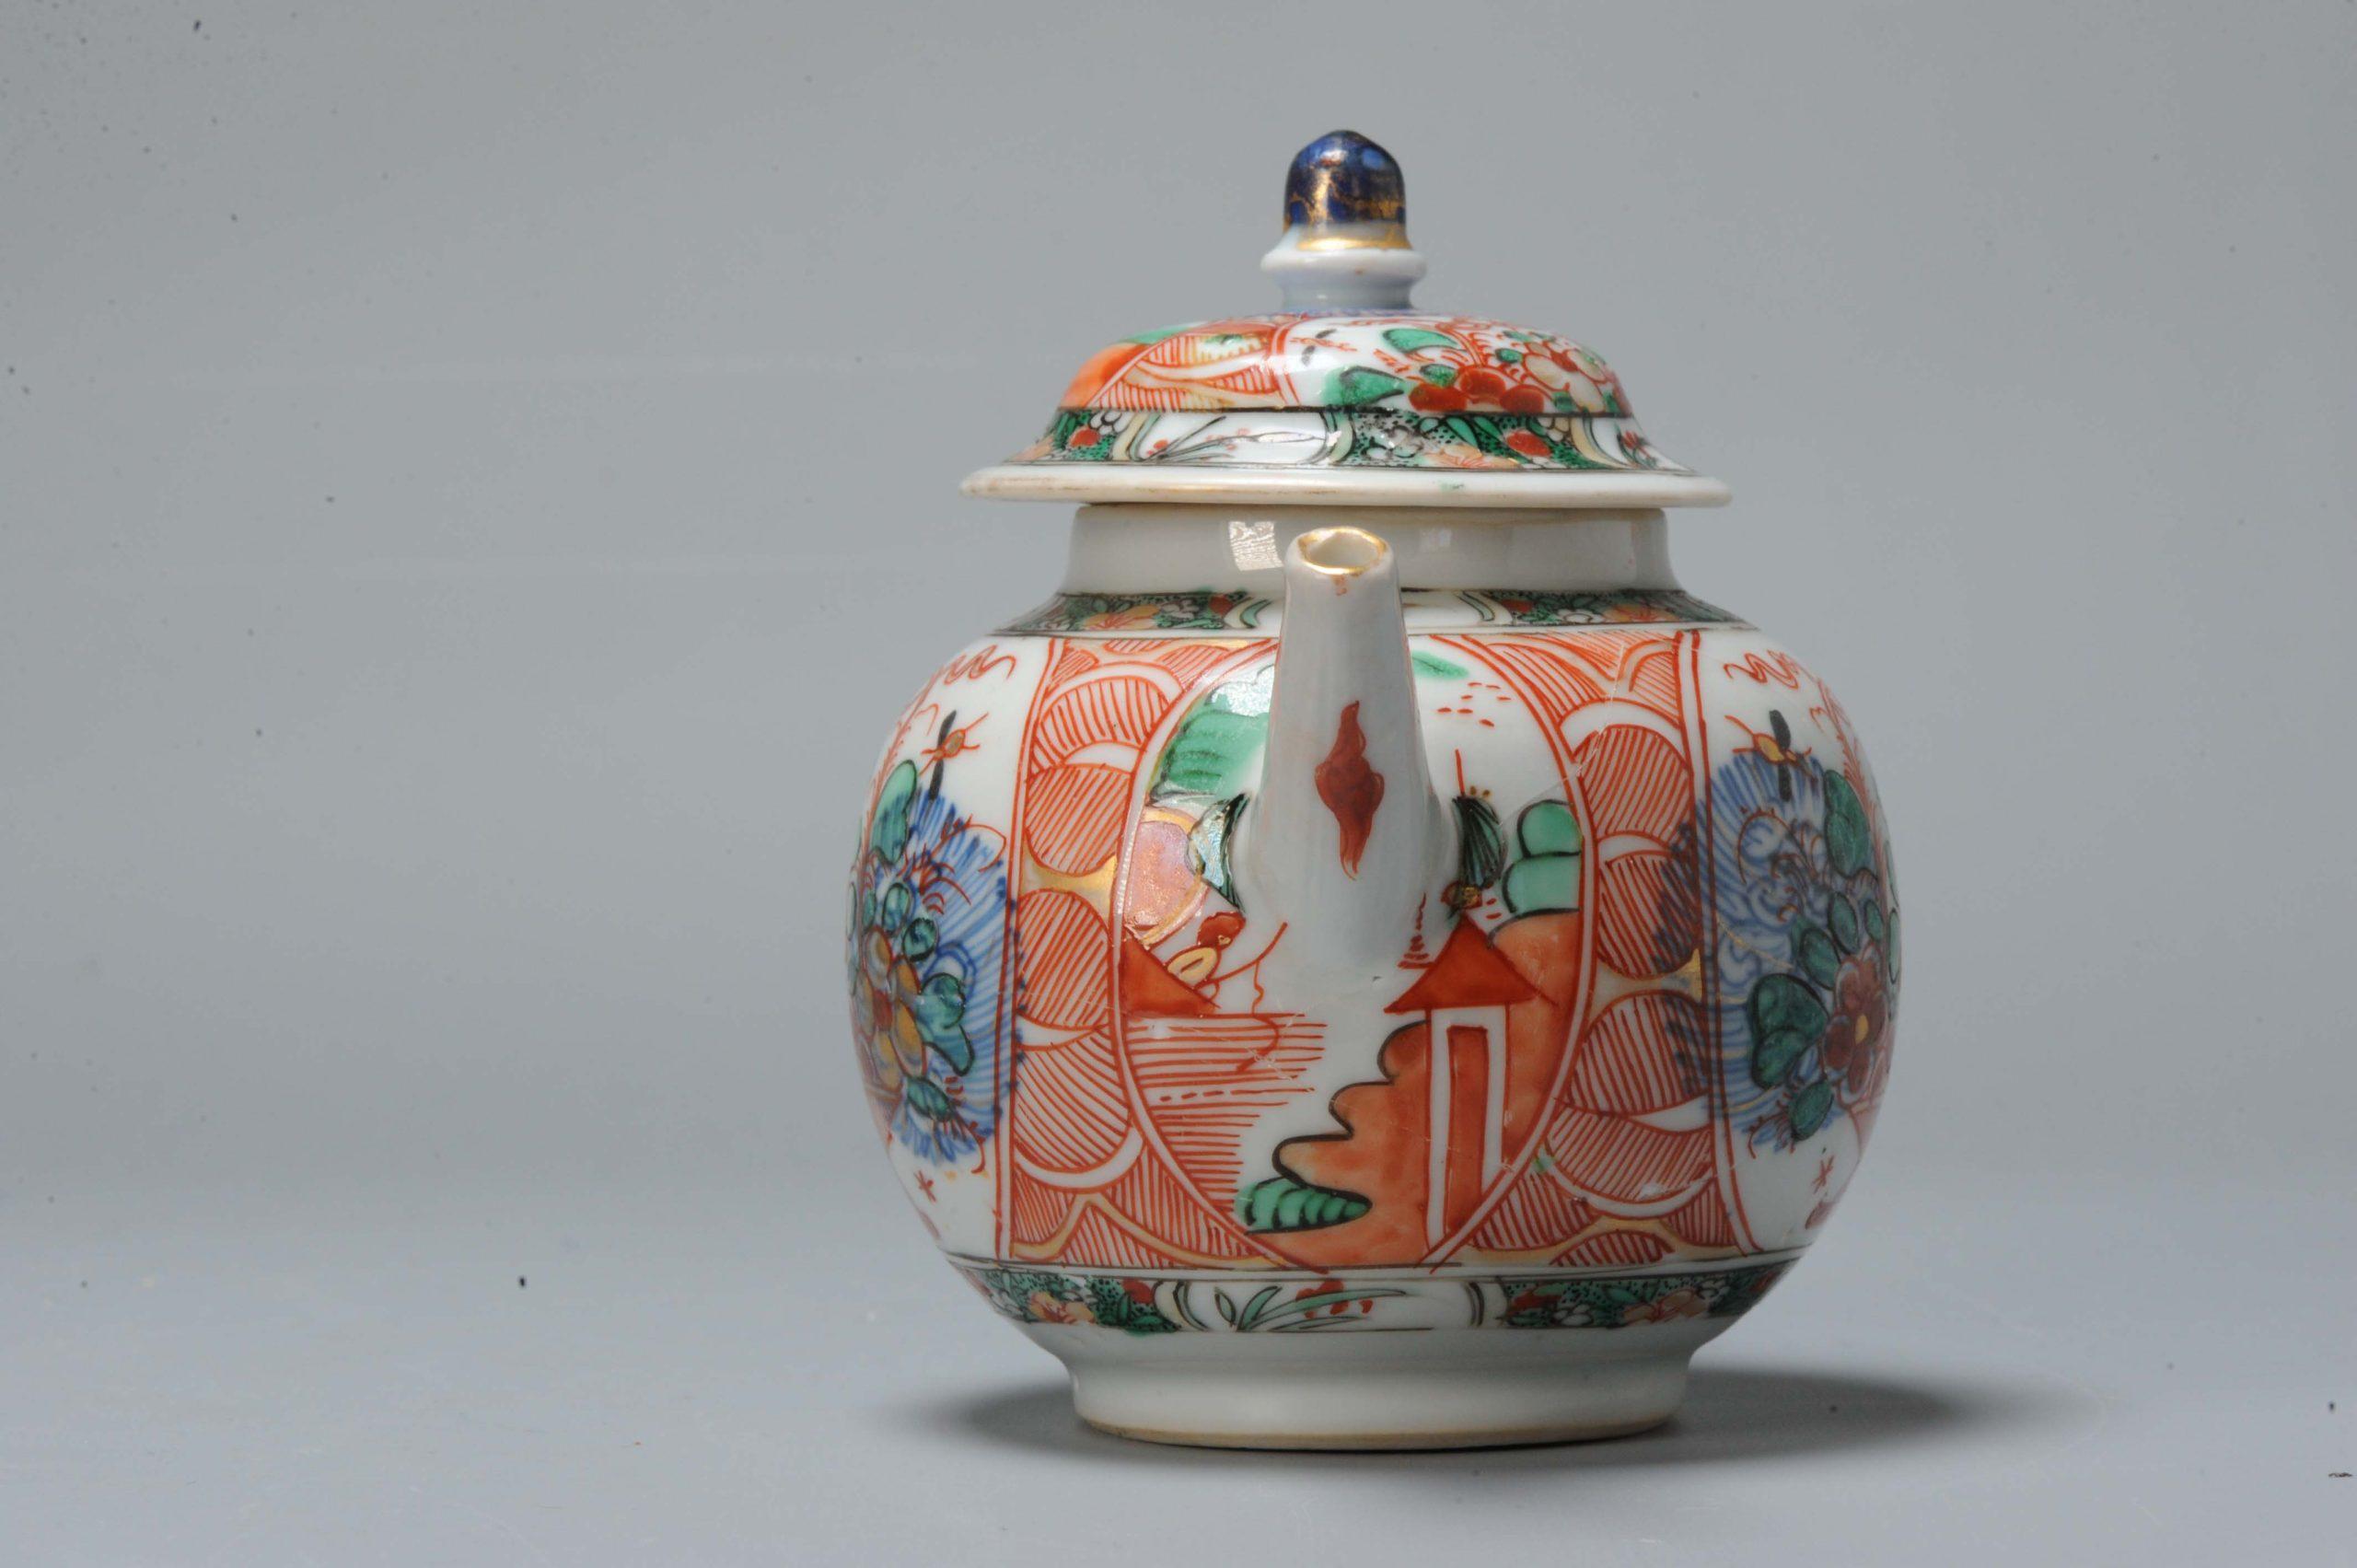 A very nicely decorated Kangxi or Yongzheng Teapot. Rare teapot in the family of Amsterdam Bont. Dating to 1st half of the 18th century

Amsterdams Bont

A relatively unknown niche of Chinese porcelain from ca 1680-1740 that was partly decorated in